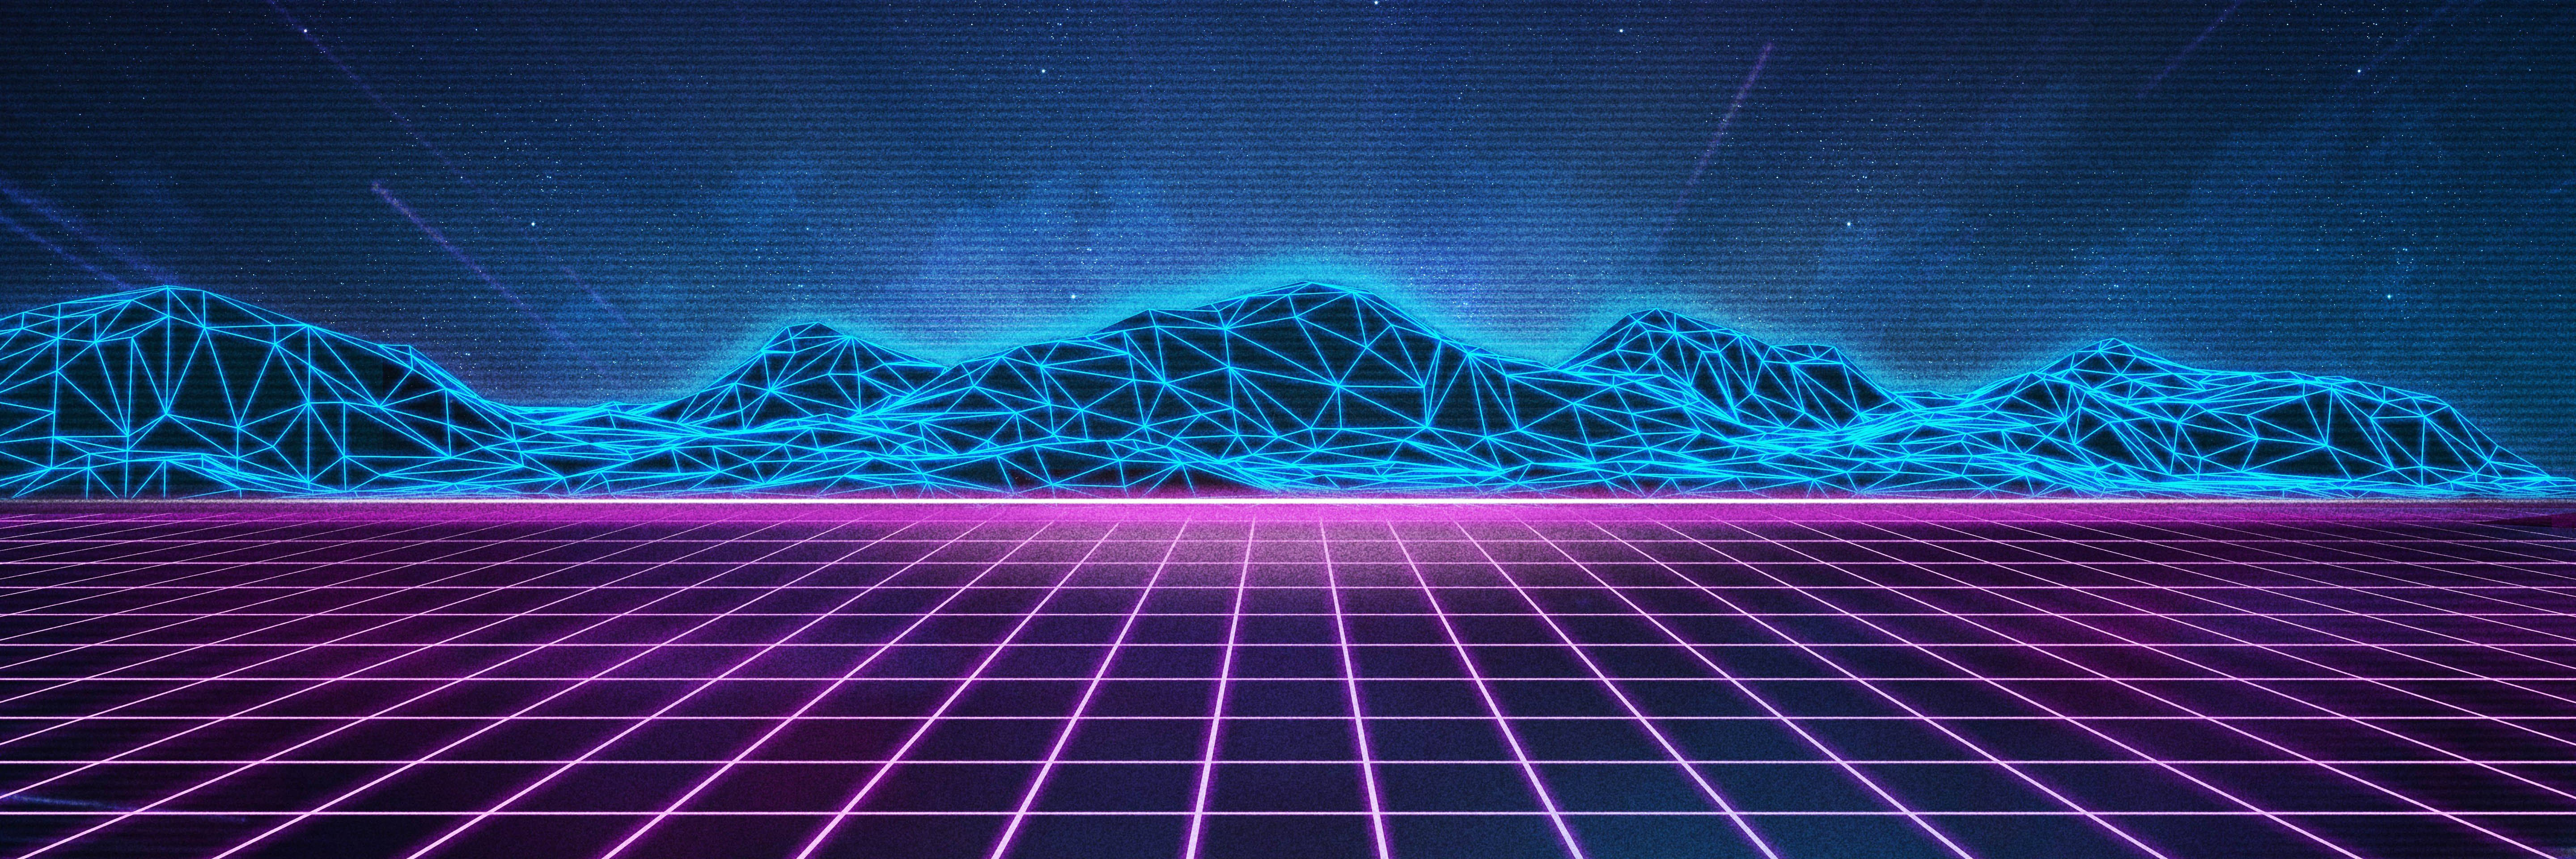 Synthwave Grid Mountains Background